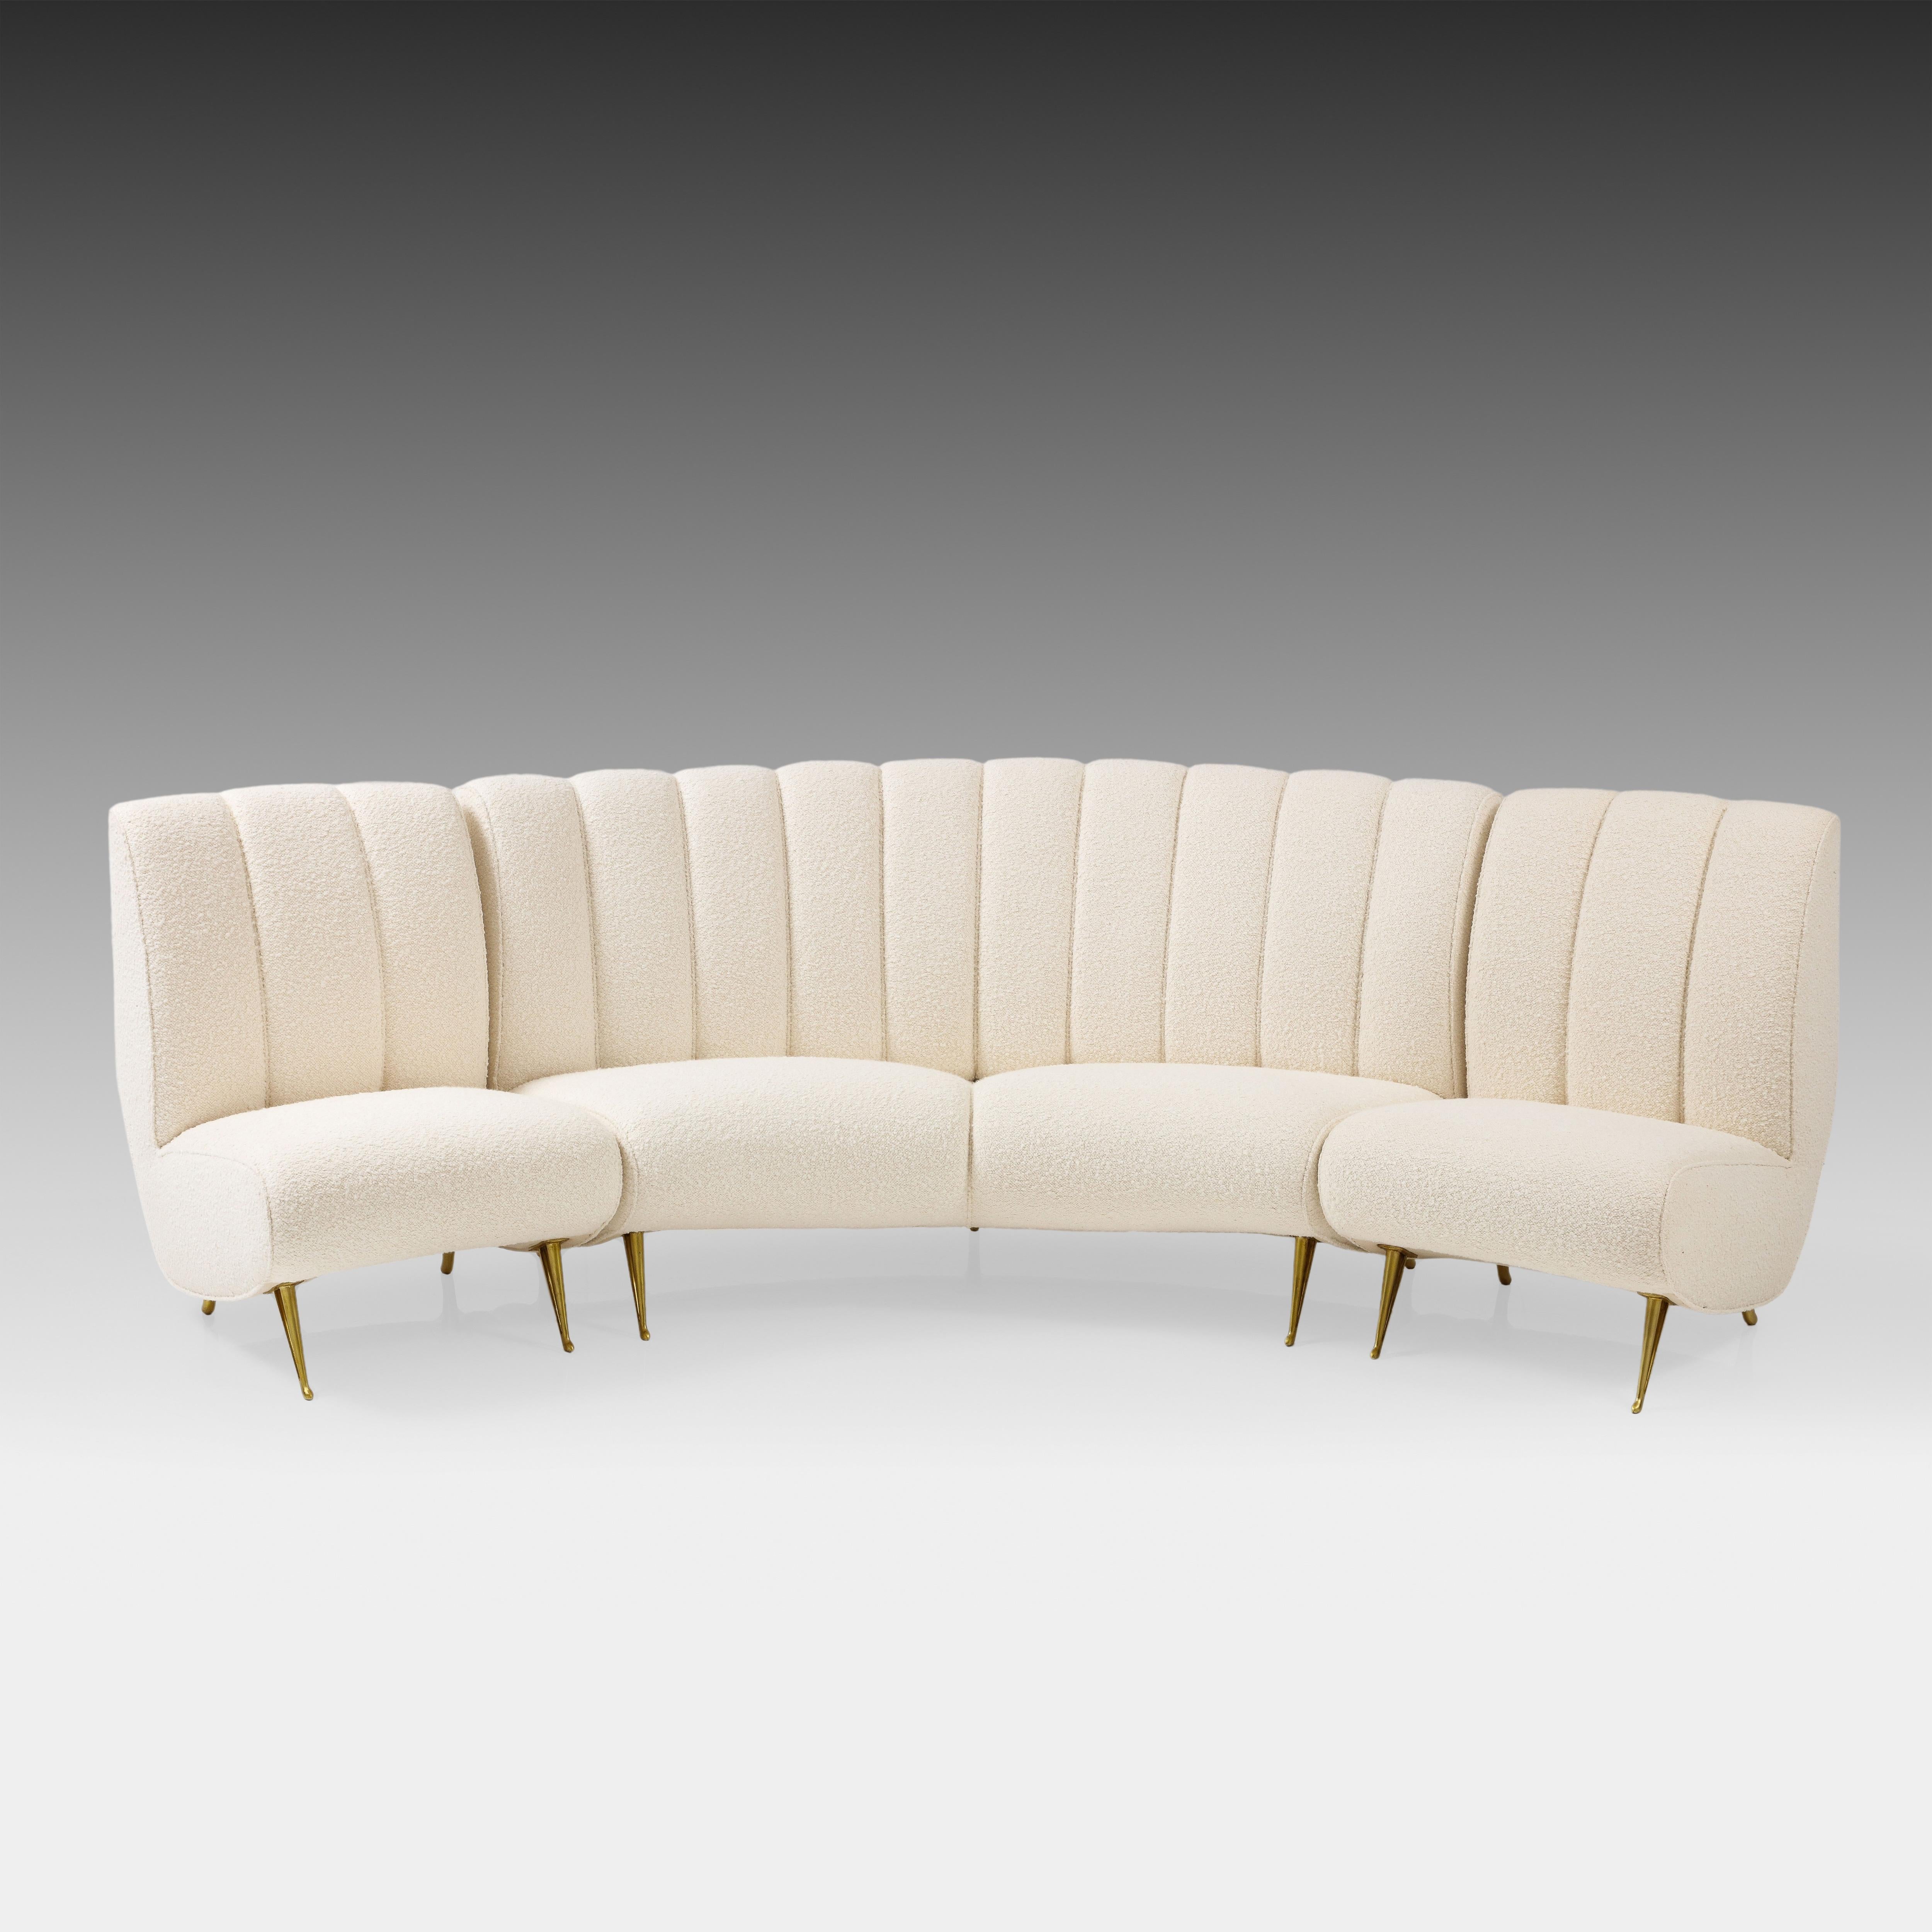 ISA Bergamo Rare Pair of Lounge or Slipper Chairs in Ivory Bouclé, Italy, 1950s For Sale 6